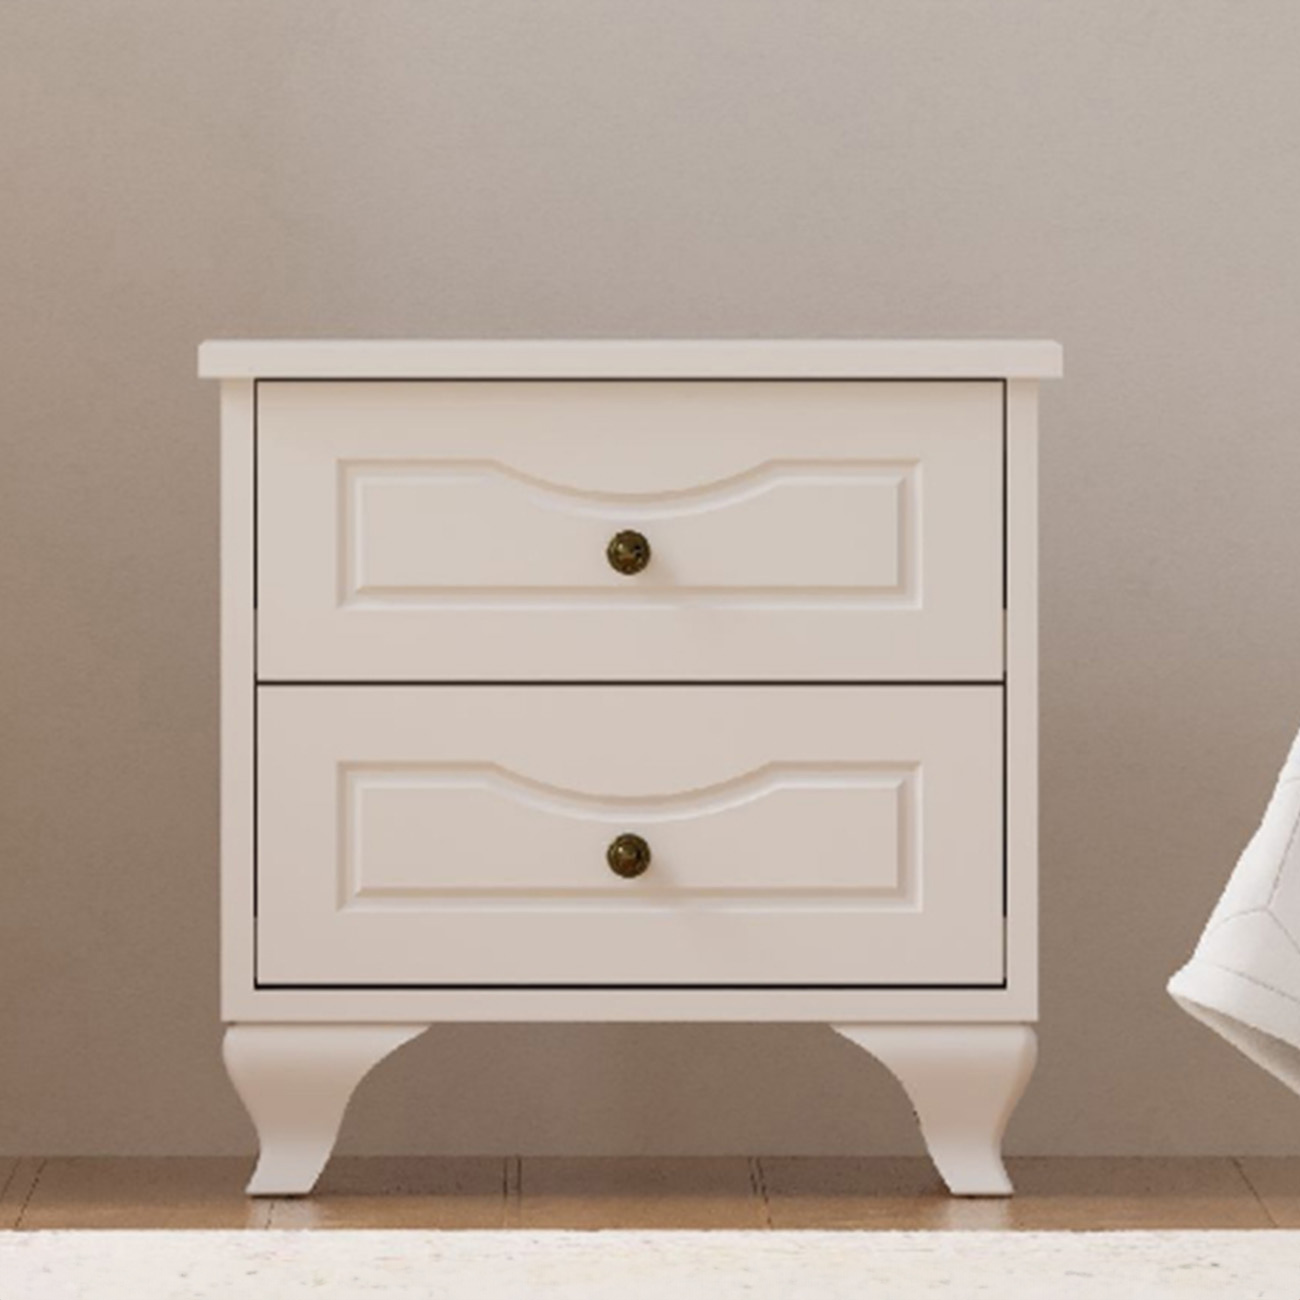 Evu ANNE 2 Drawers White Bedside Table Image 1